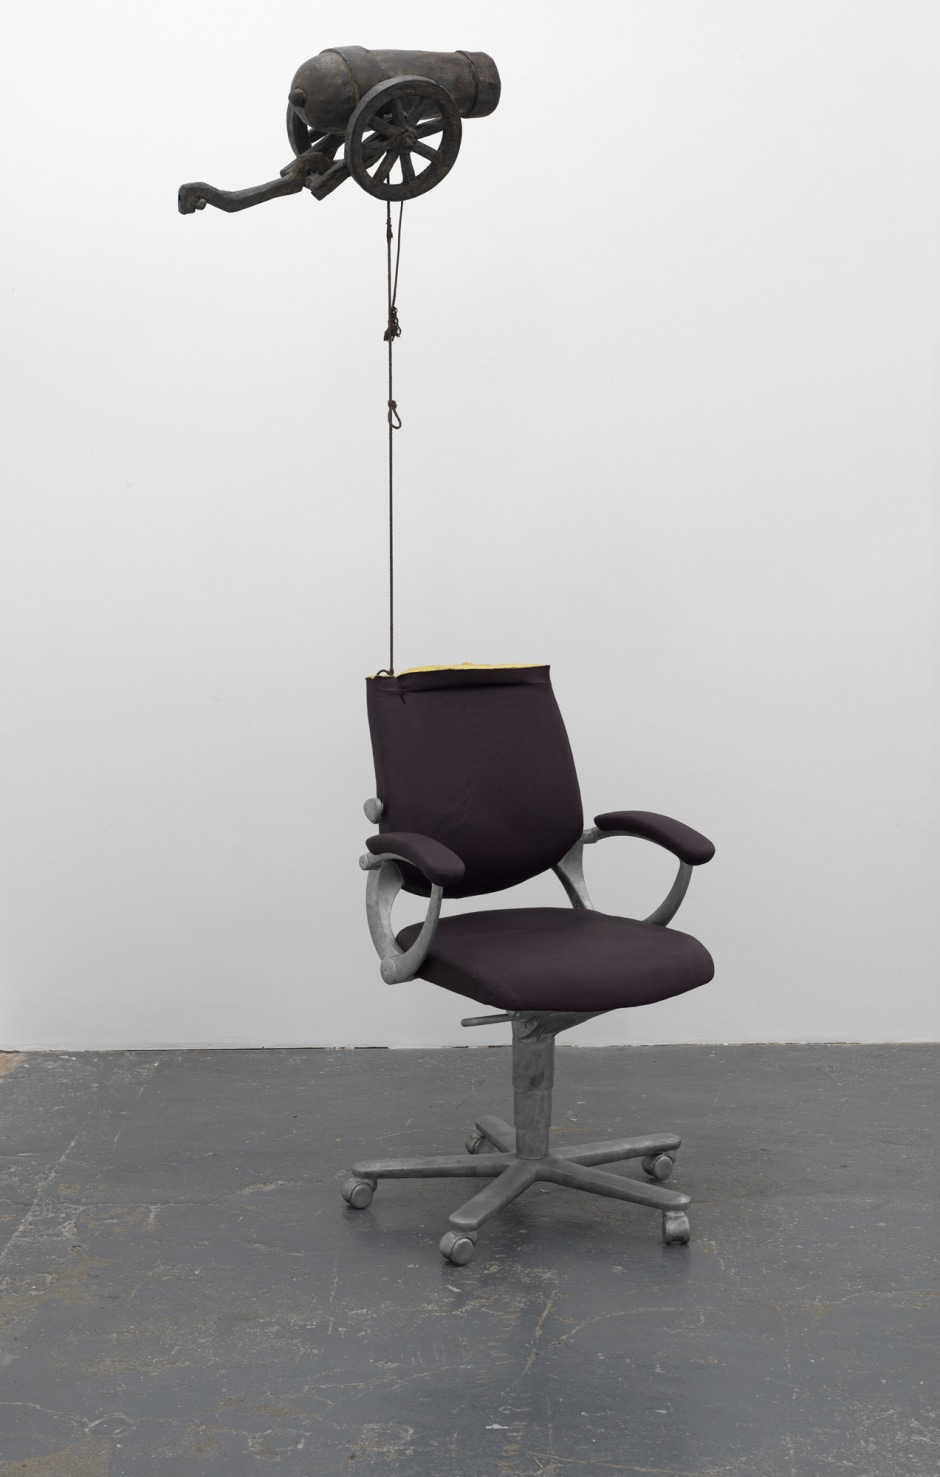 A thing called gearbox, 2004  cast aluminium, acrylic paint, iron rod, string, copper  231.0 x 68.0 x 67.5 cm 91 x 26 3/4 x 26 5/8 in.